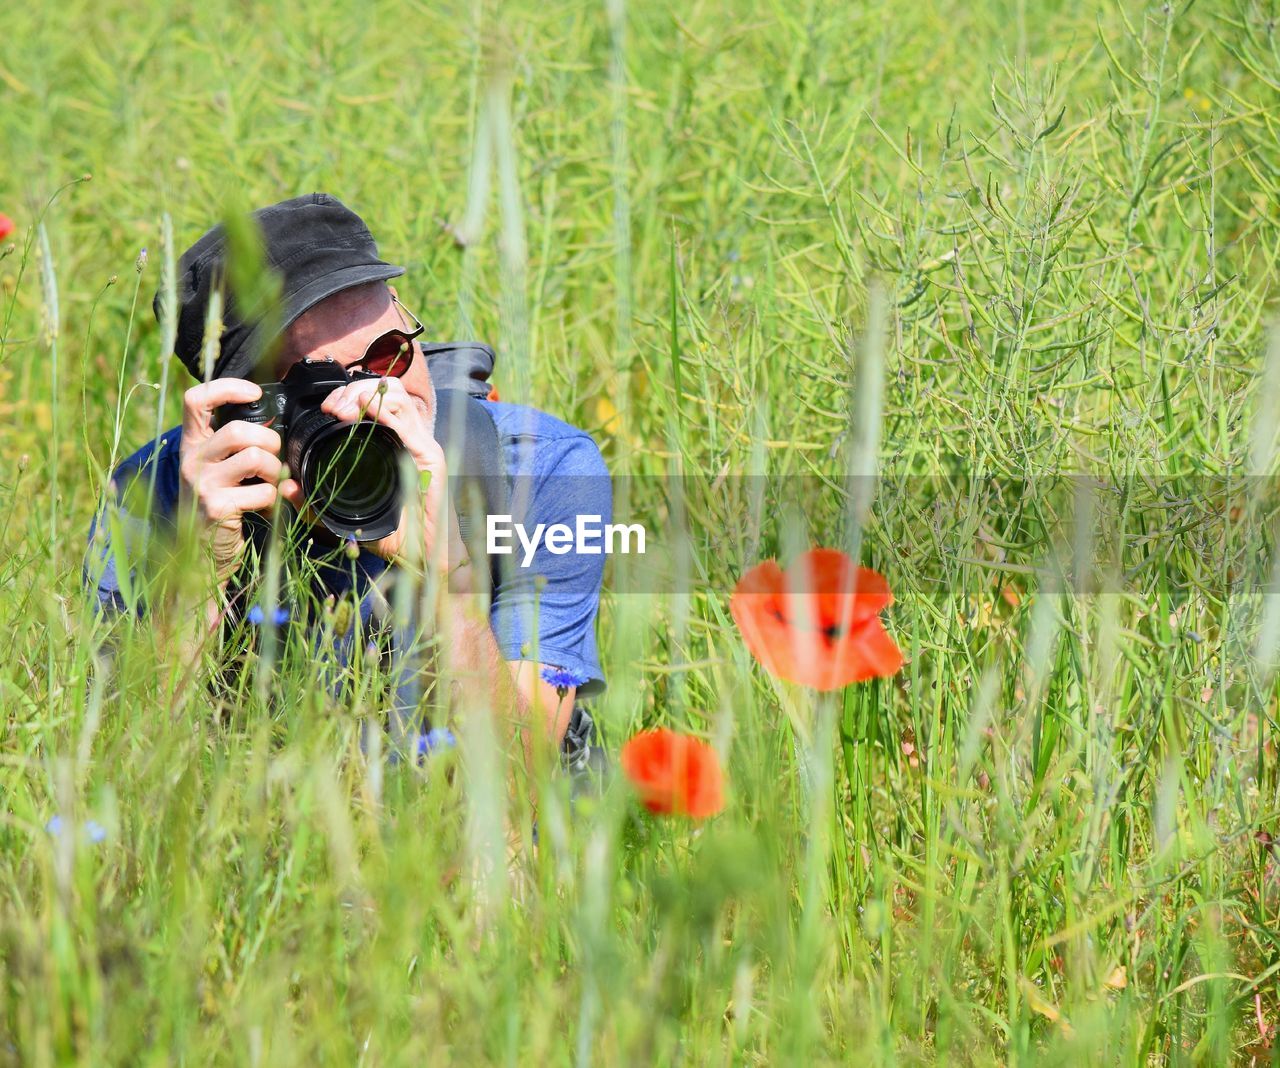 Man photographing poppy amidst plants on field during sunny day